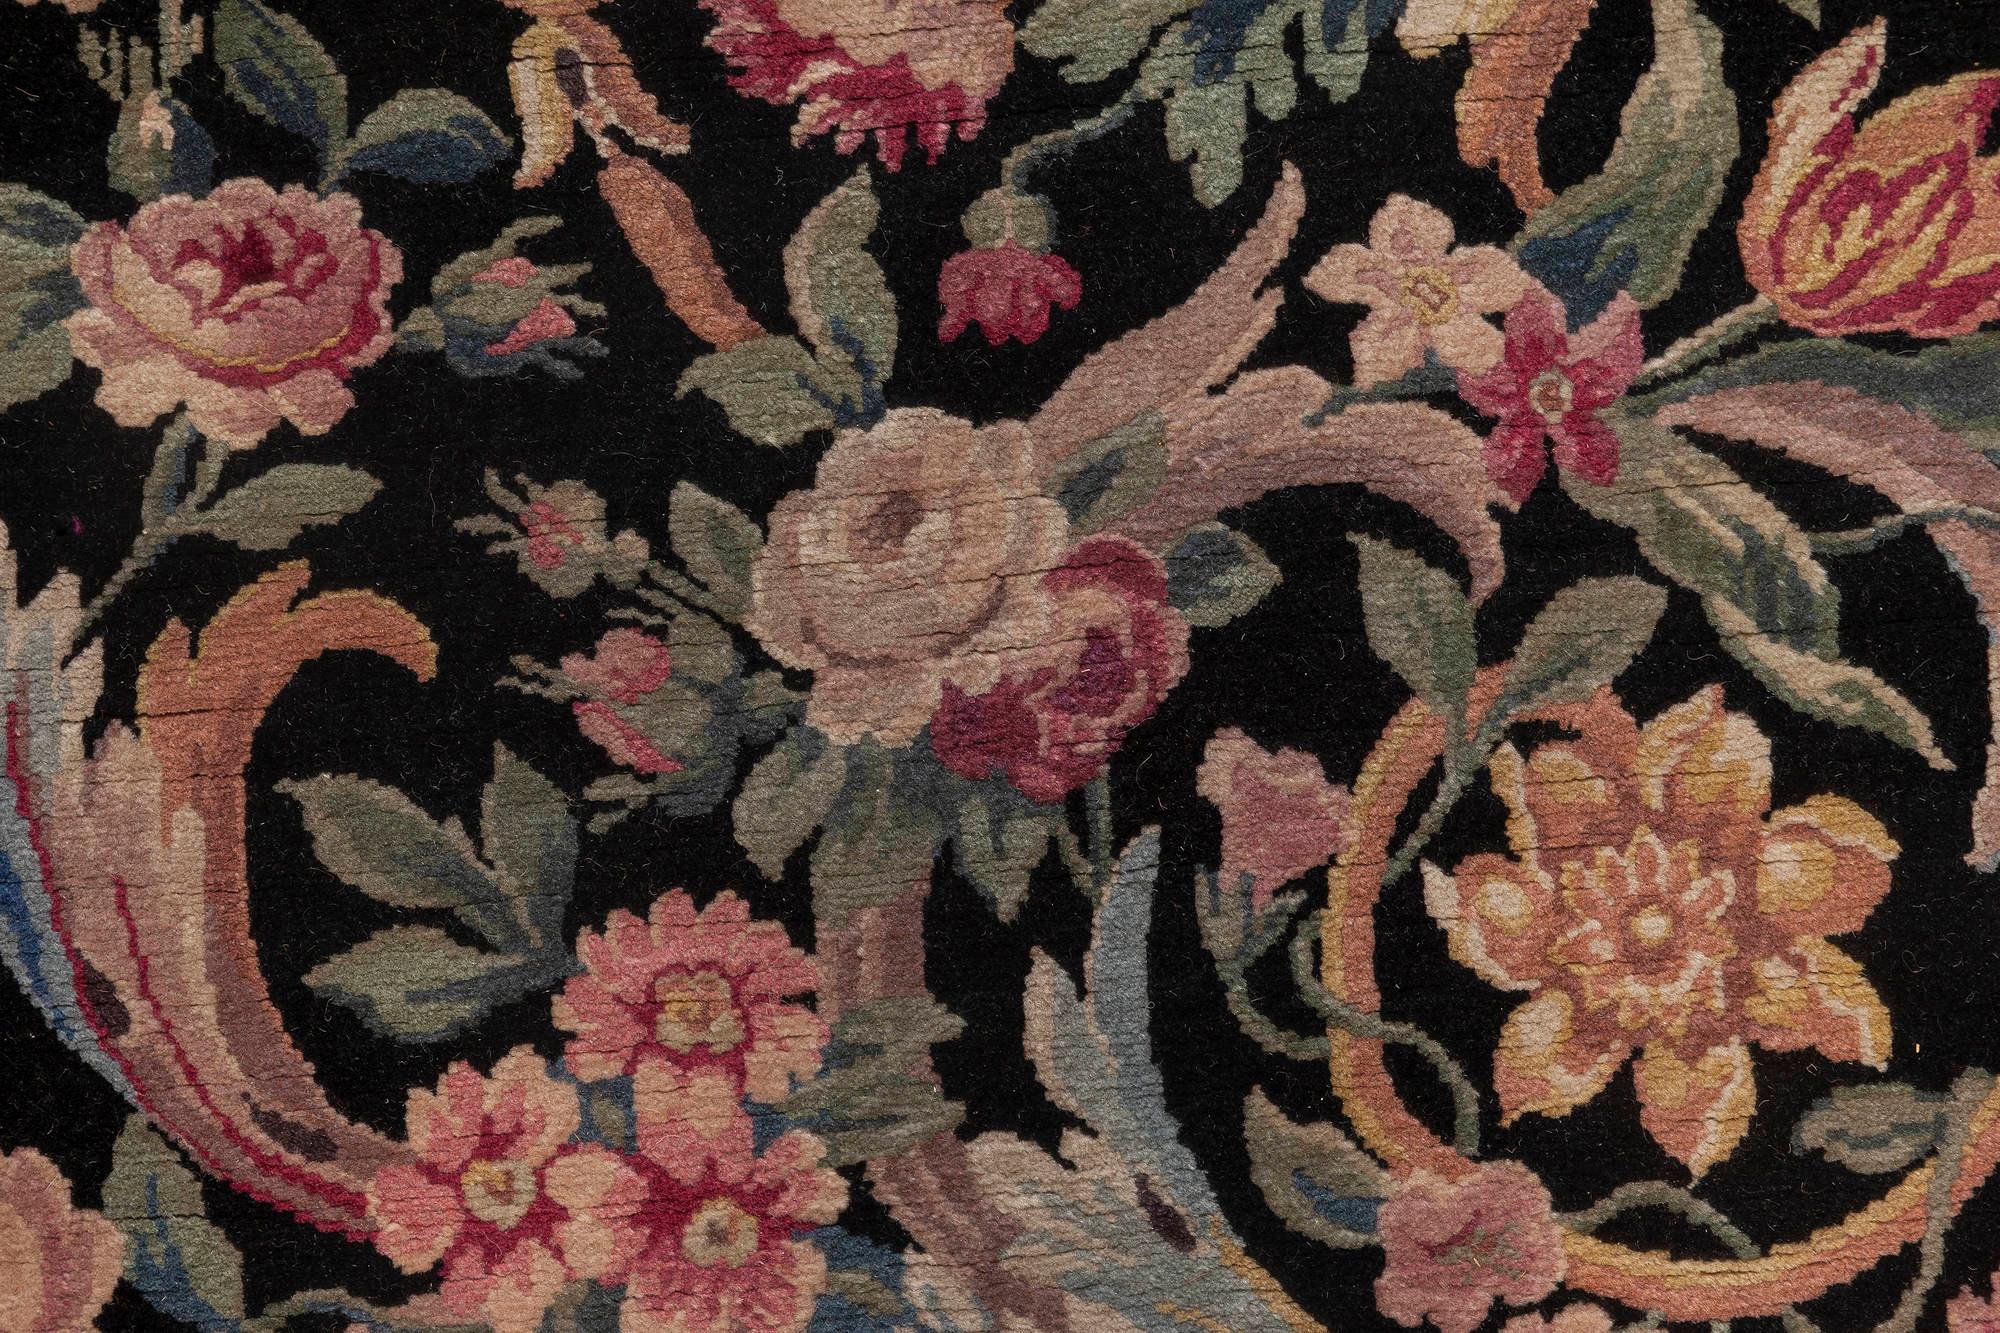 Early 20th century Savonnerie floral black background wool rug (size adjusted)
Size: 5'0